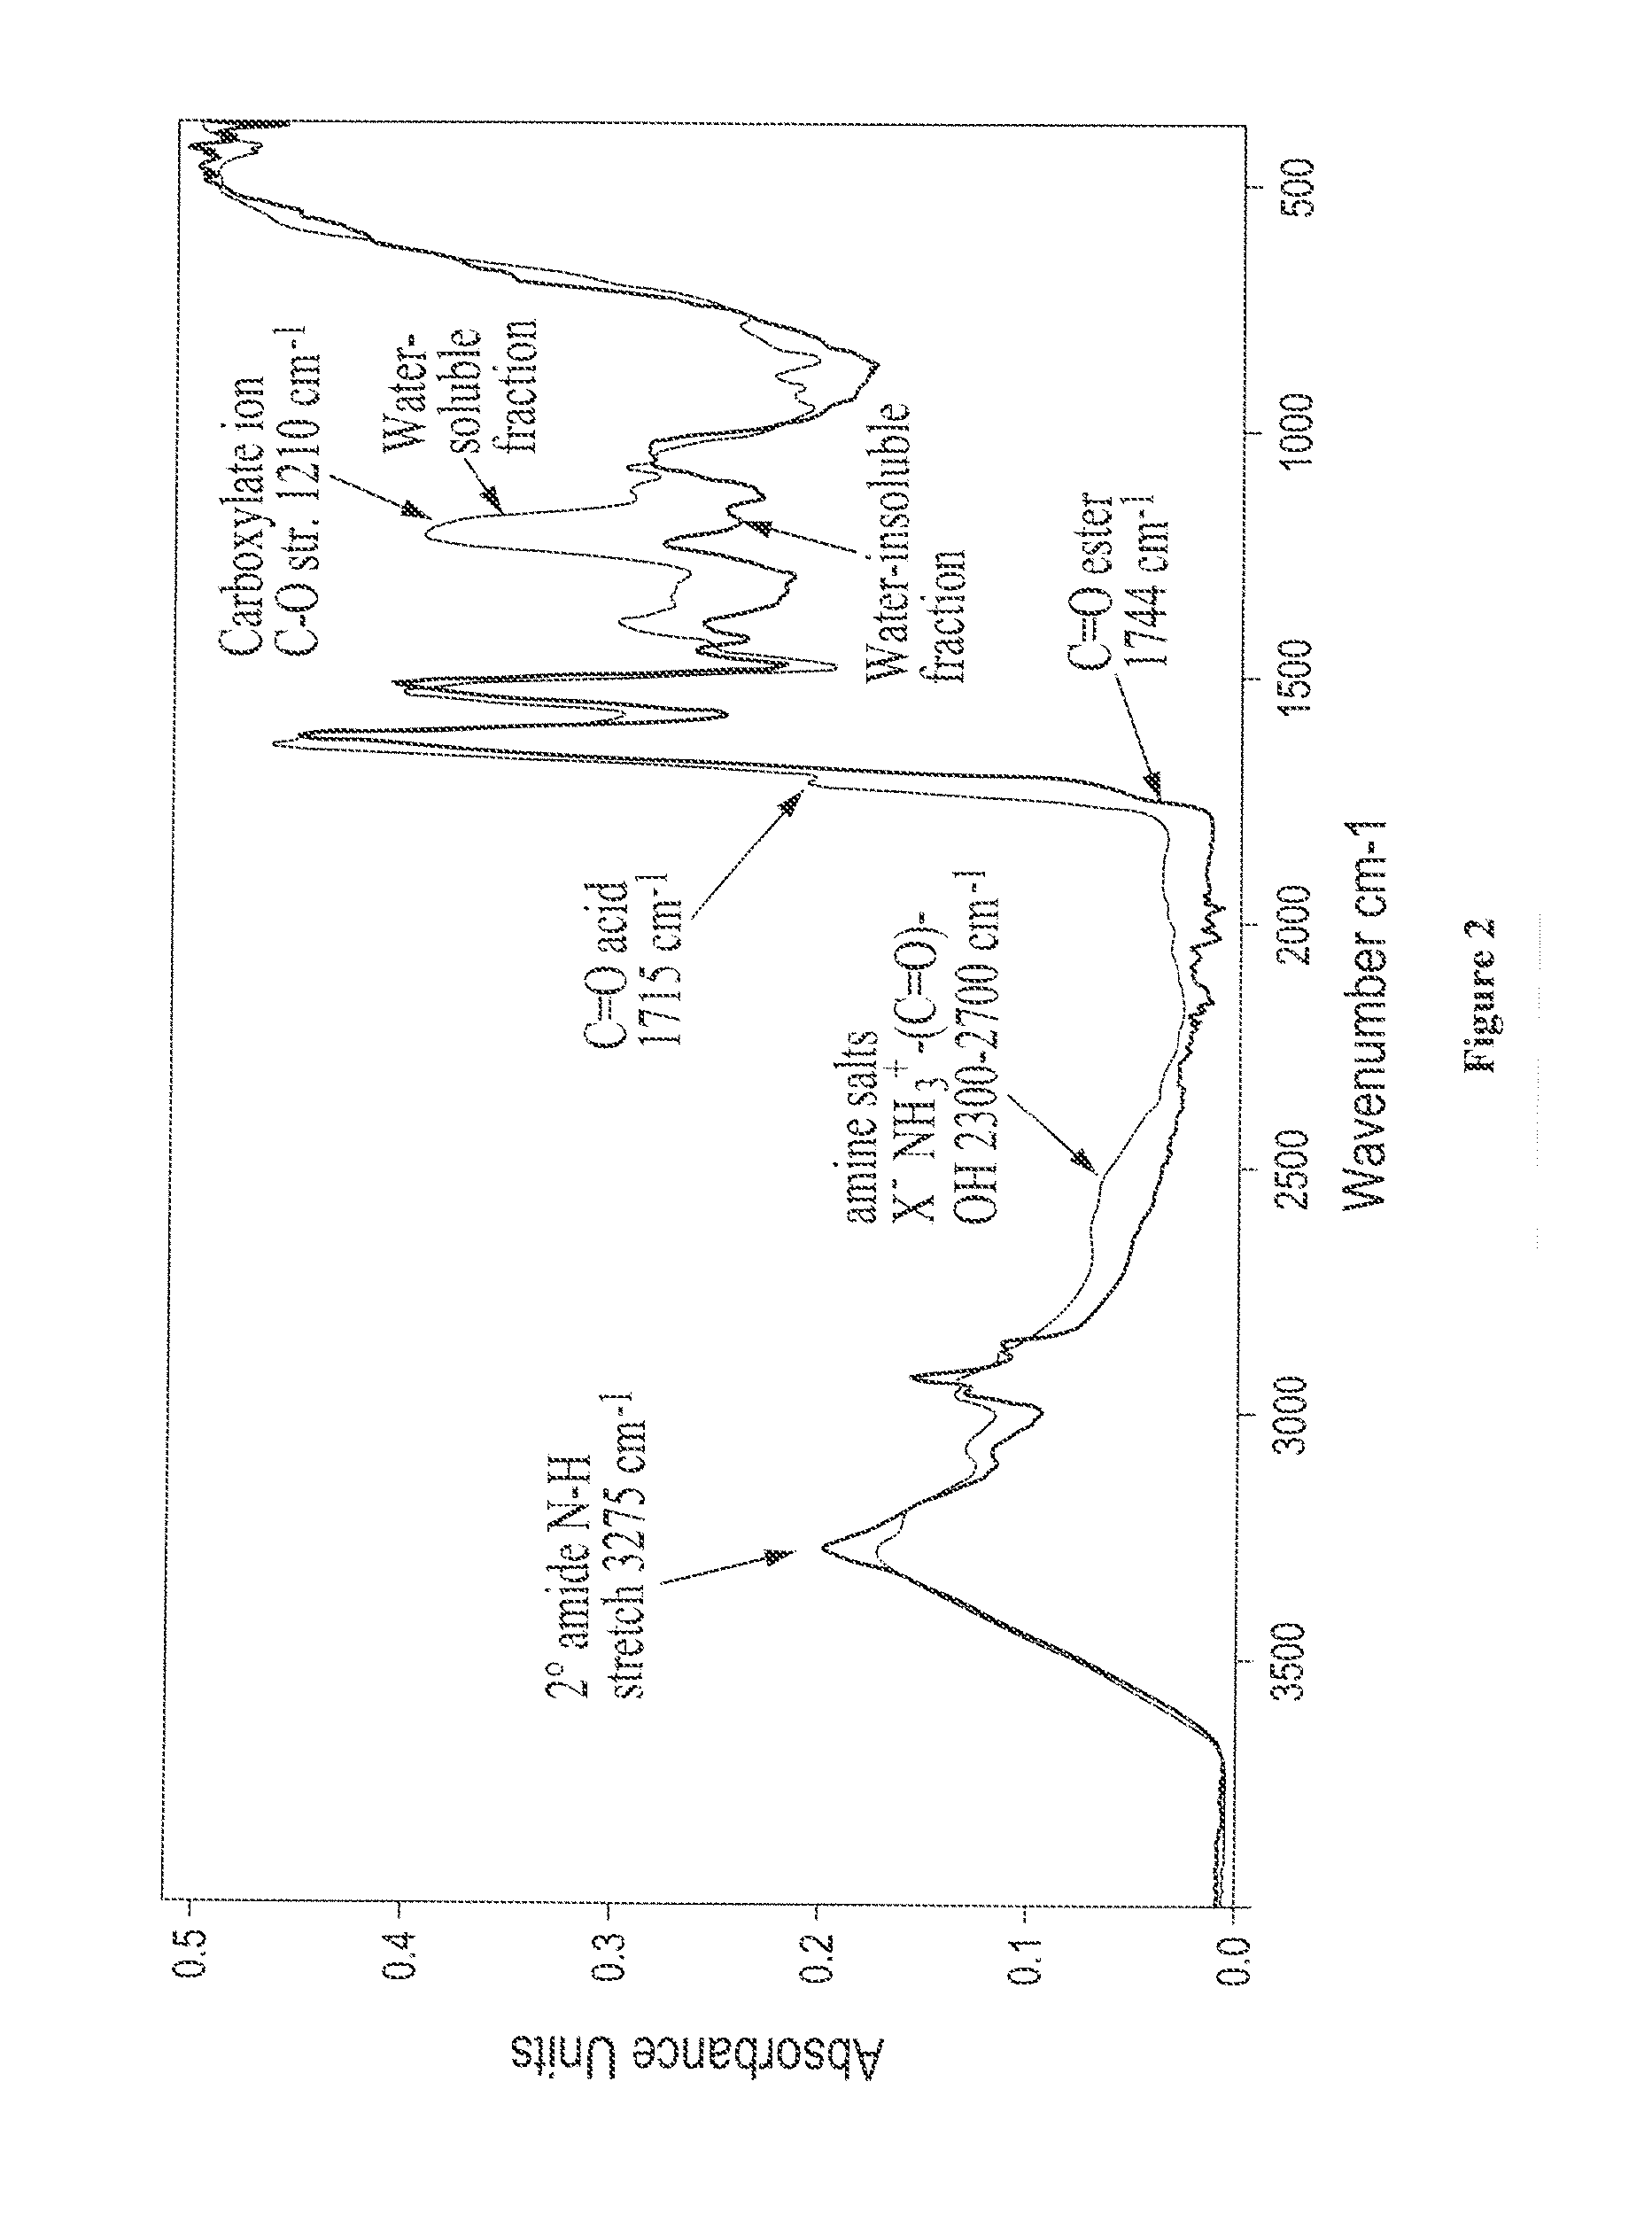 Protein adhesives containing an anhydride, carboxylic acid, and/or carboxylate salt compound and their use